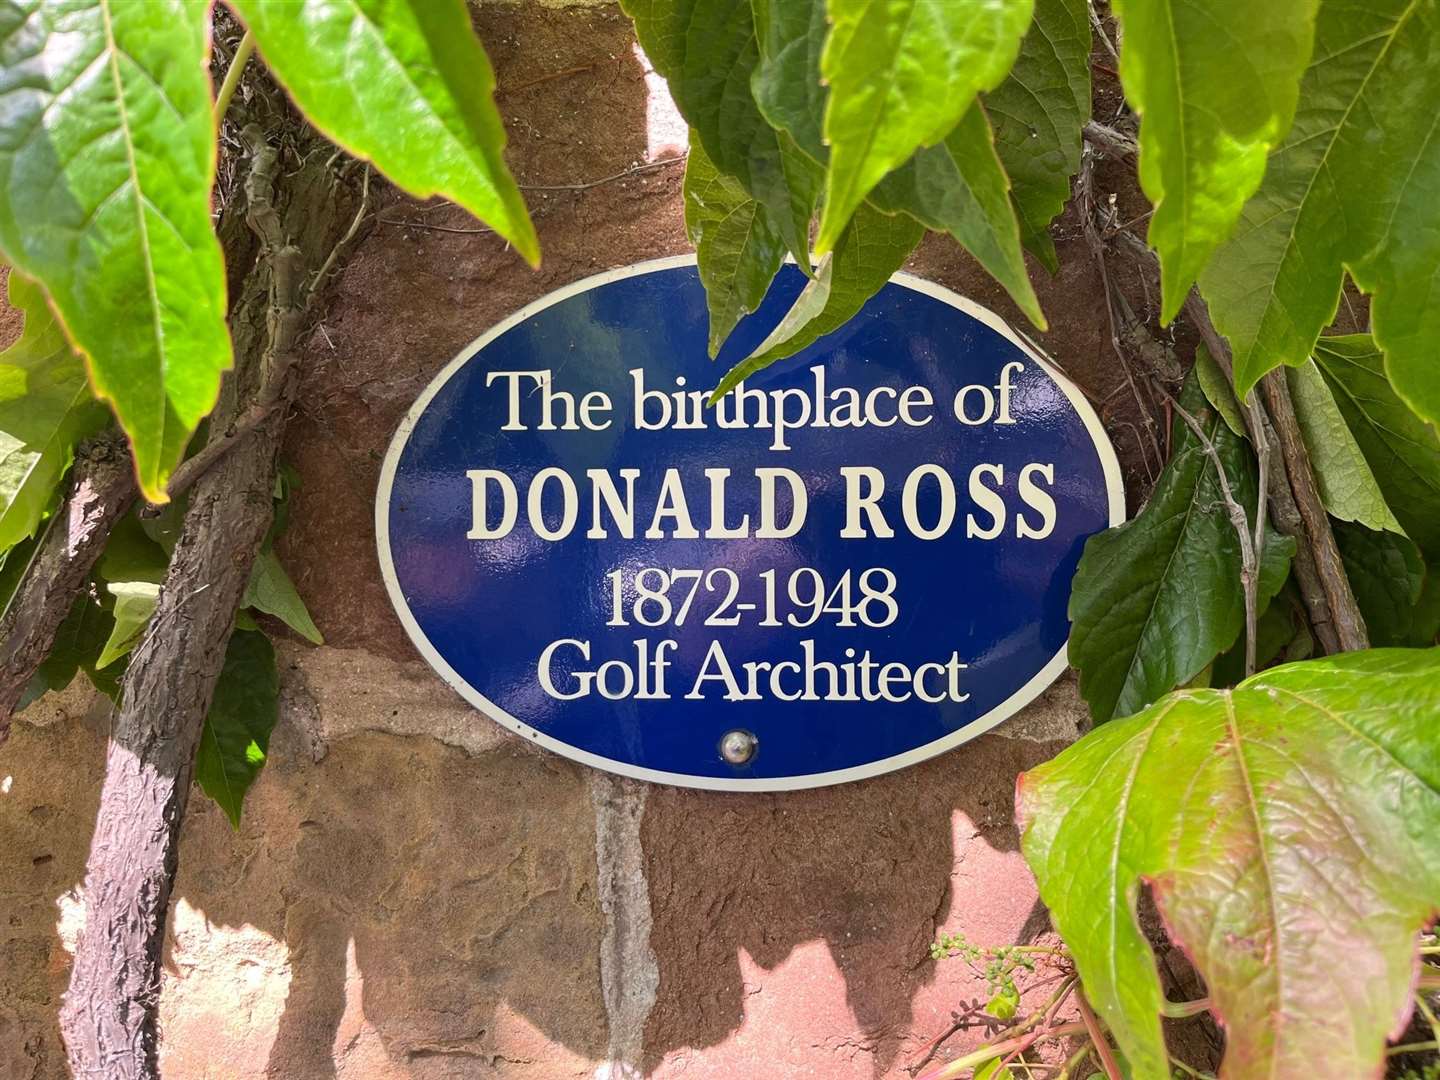 Donald Ross is remembered fondly in the USA.